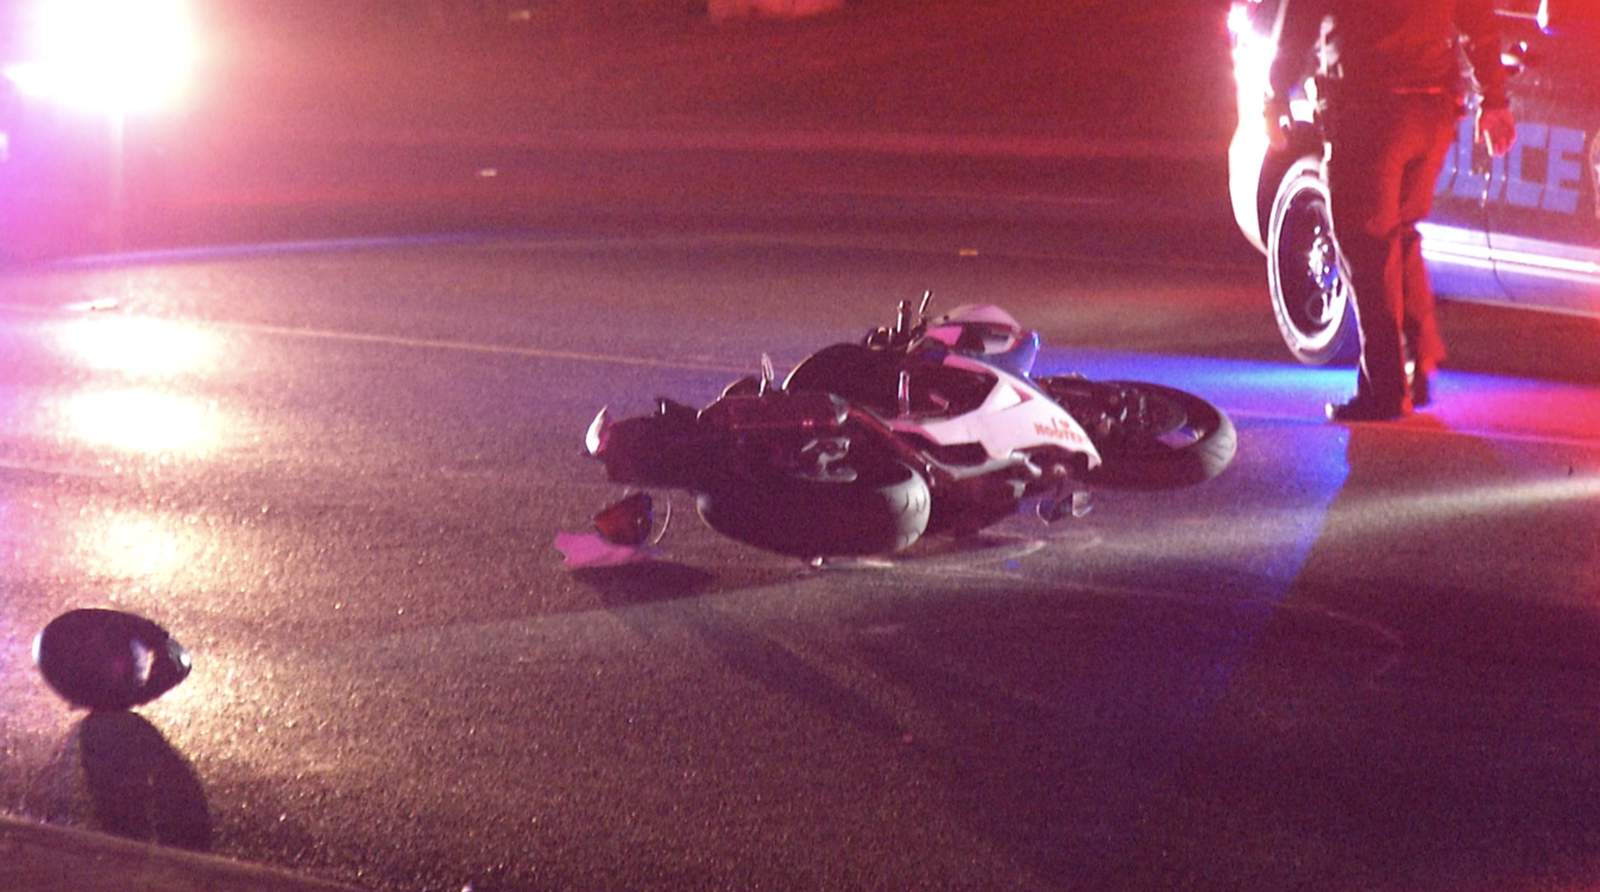 Police: Motorcyclist in critical condition after crashing on Northwest Side street